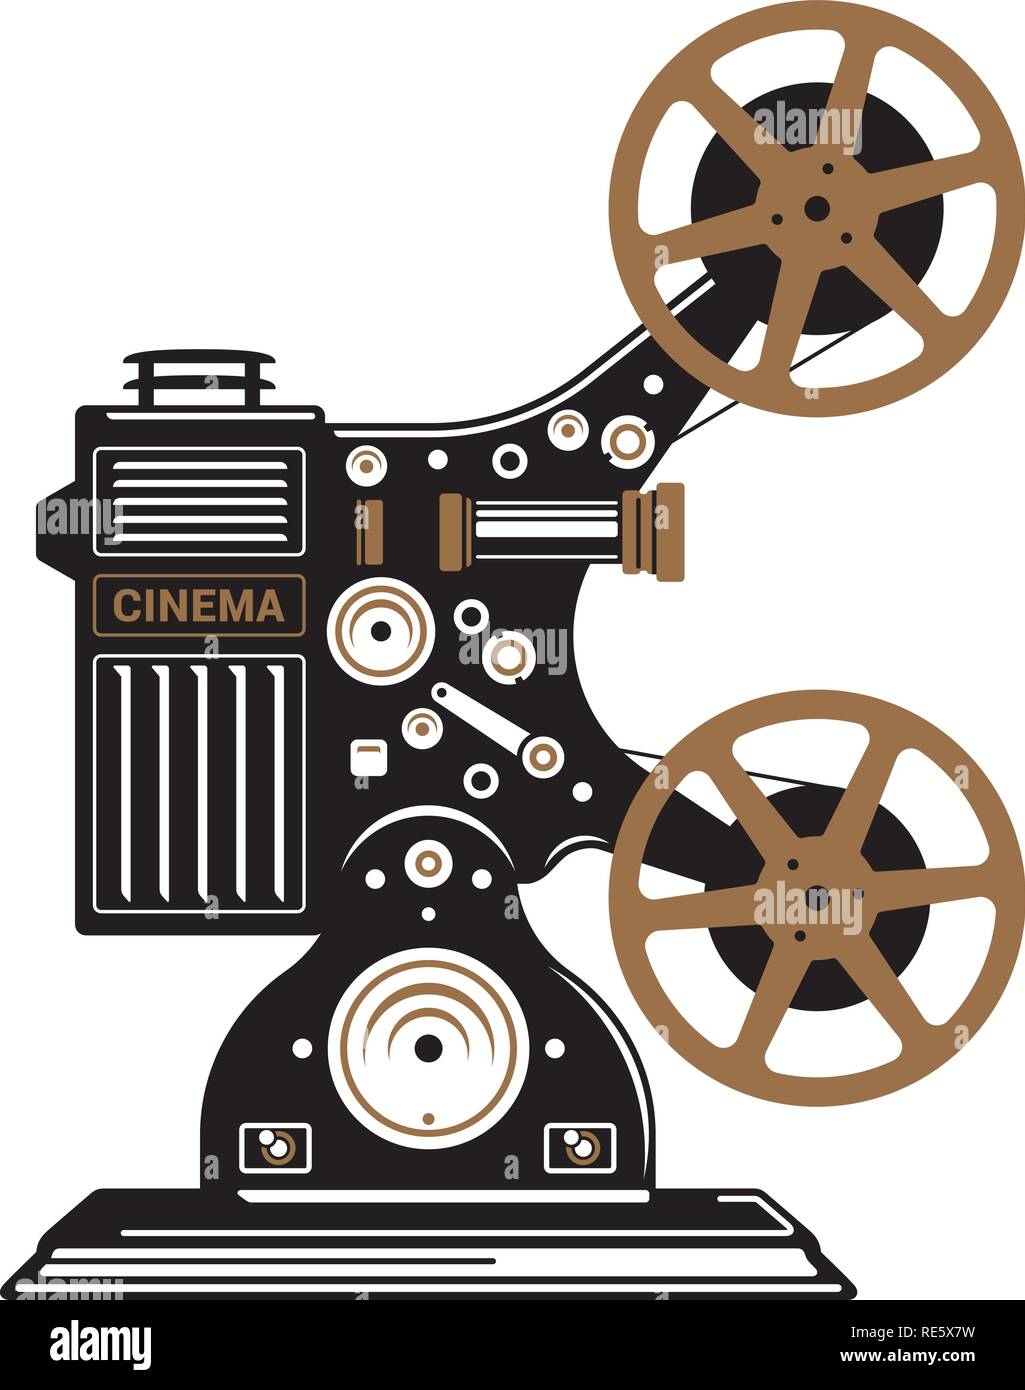 Film Stock Vector Images - Alamy